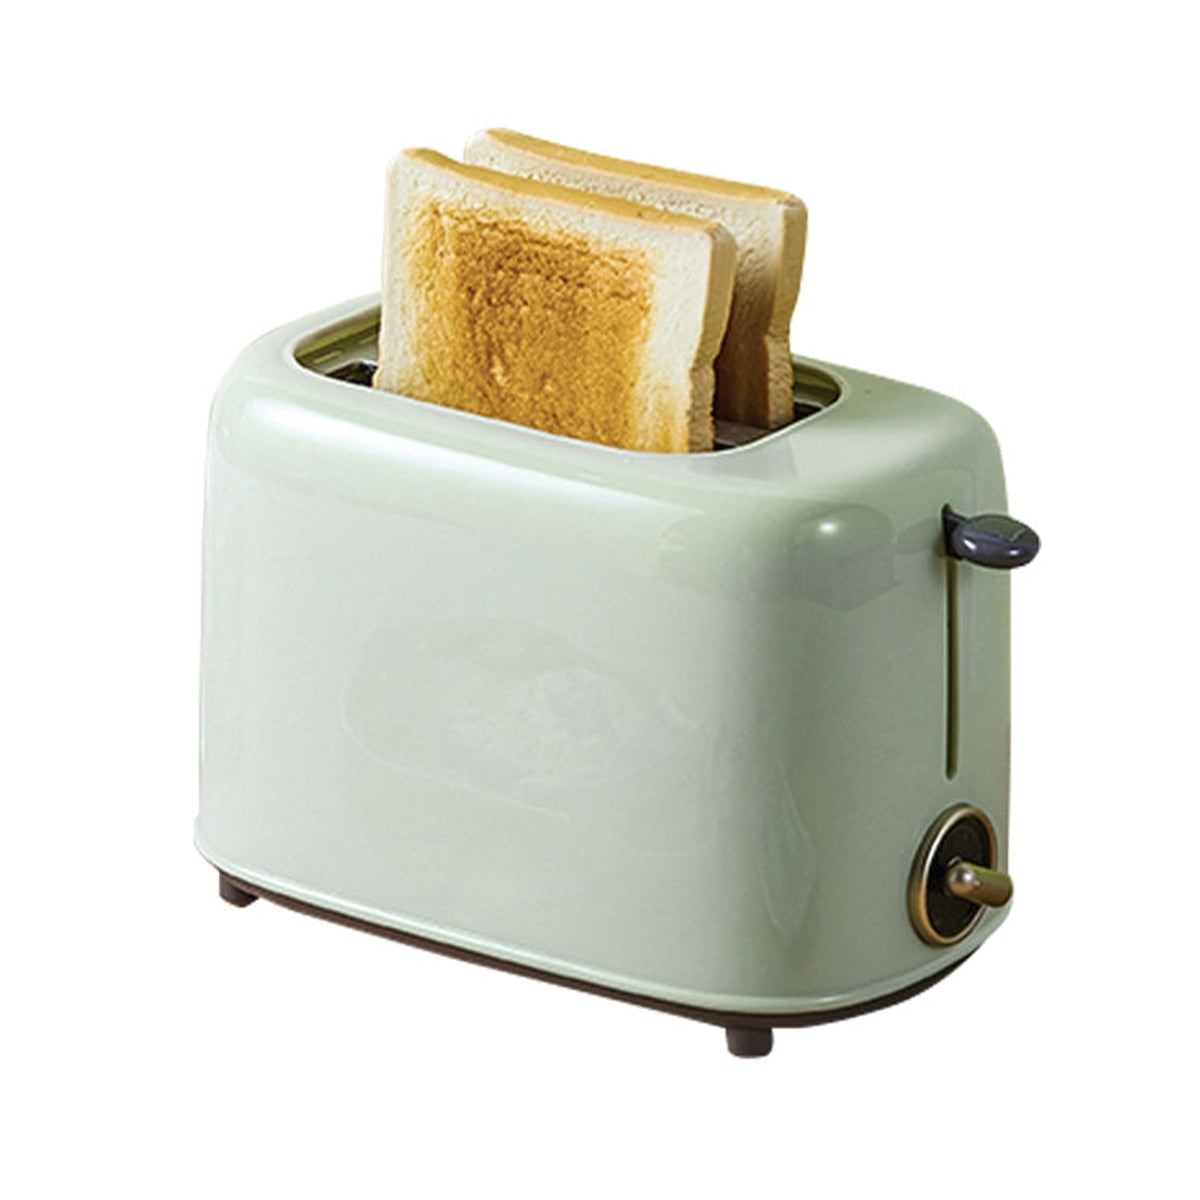 Authentic Toaster